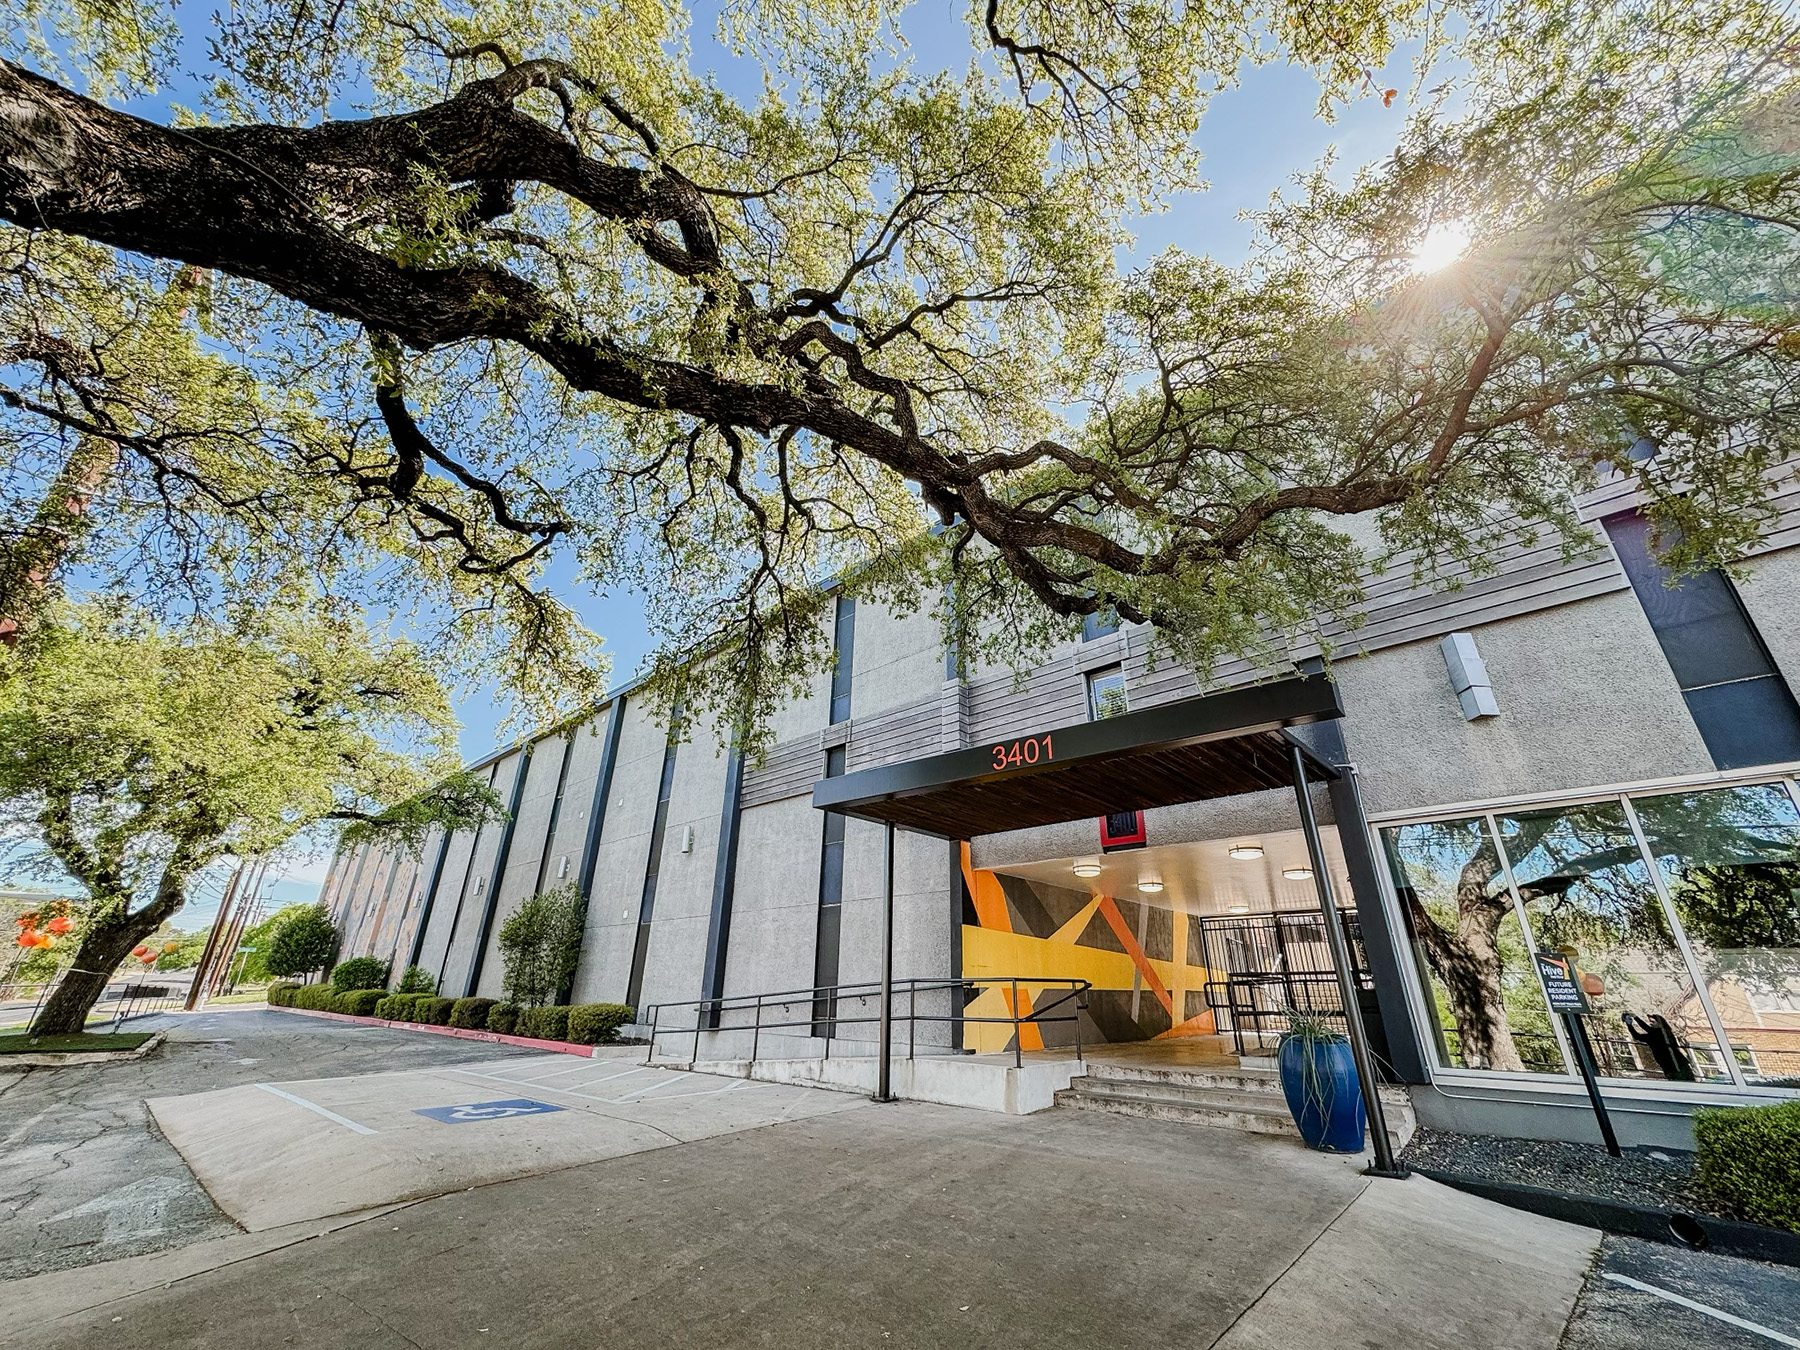 Apartment building exterior with live oak trees